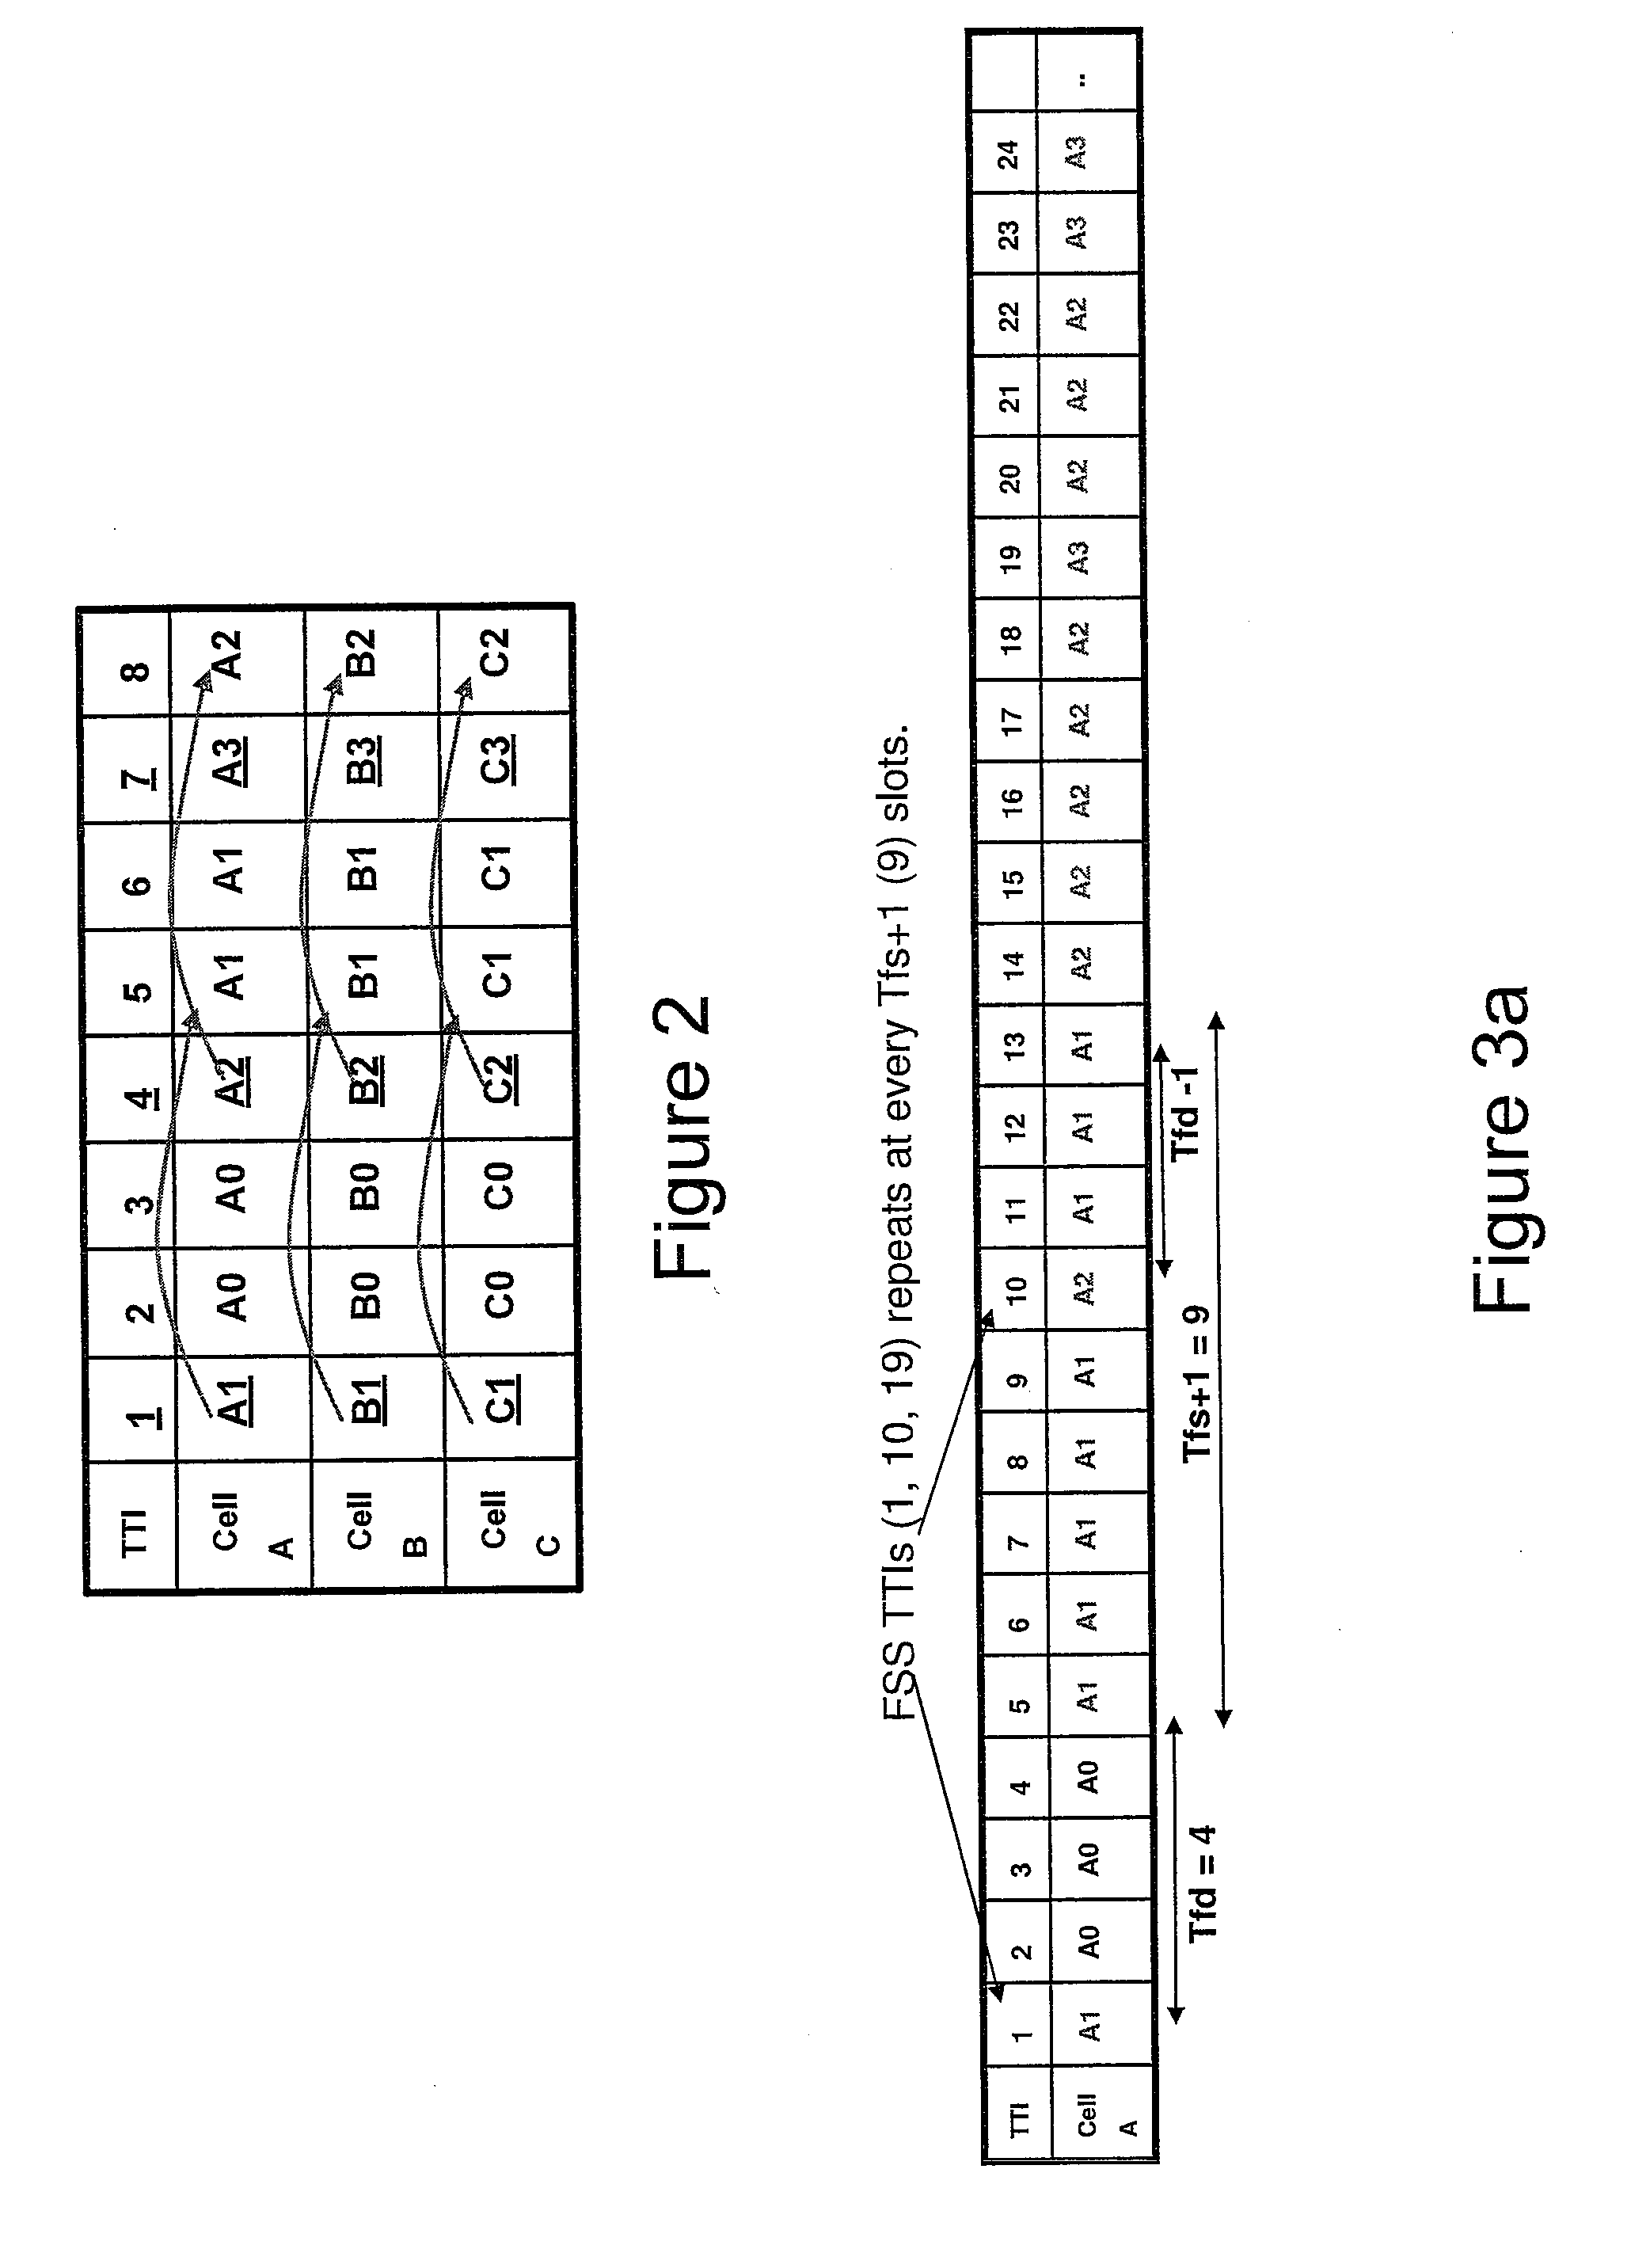 System and Method for Scheduling Users on a Wireless Network